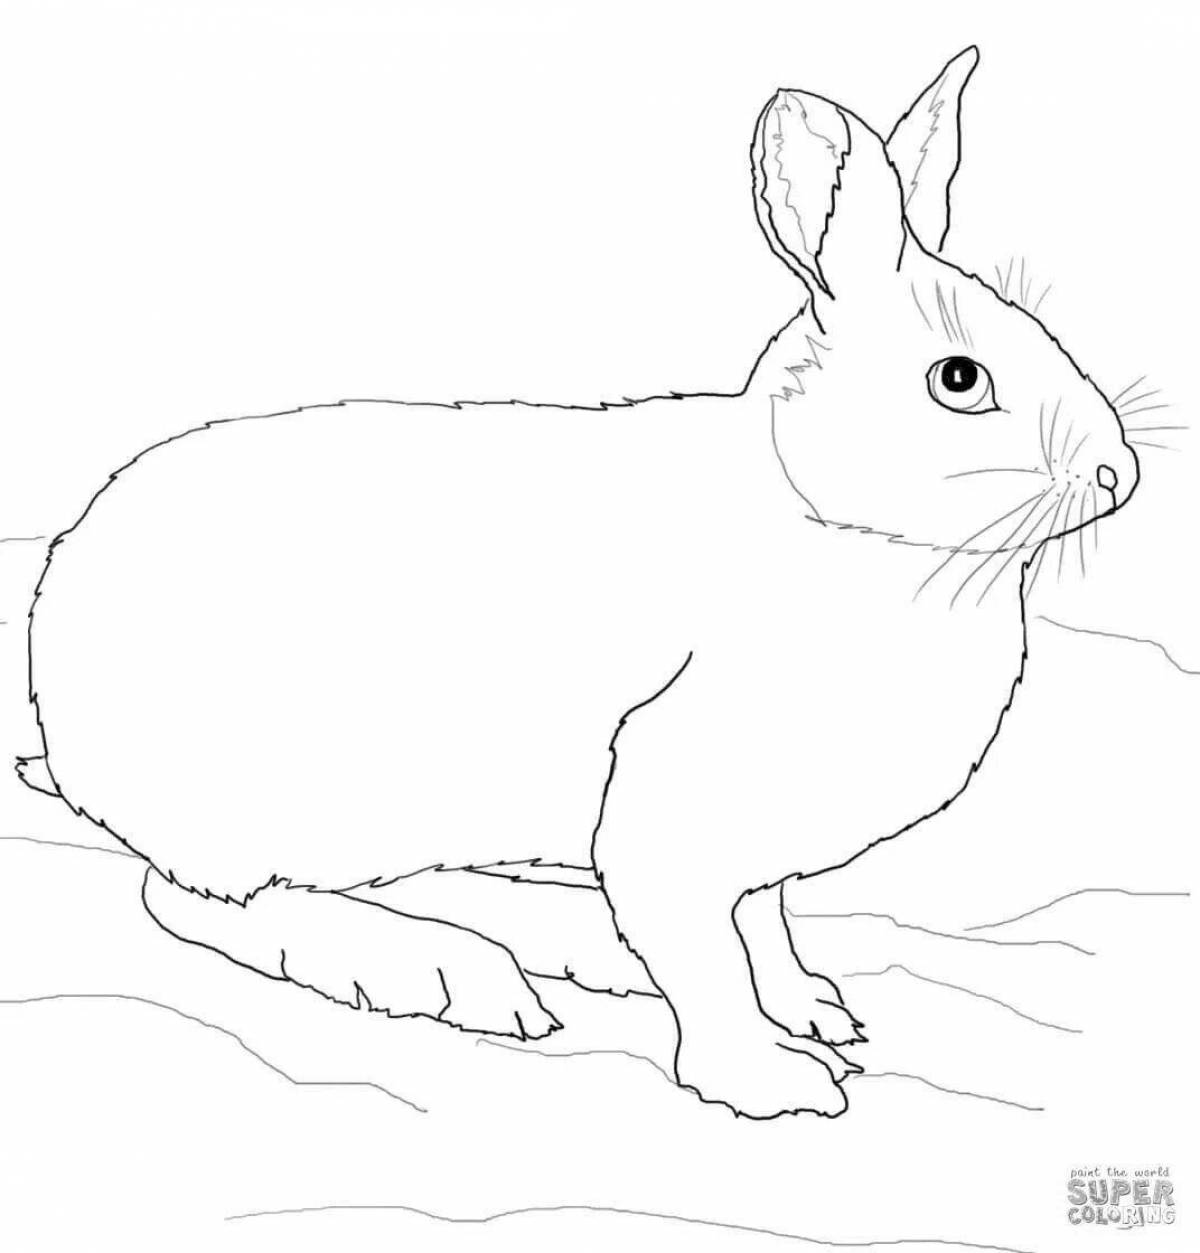 Radiant hare coloring page